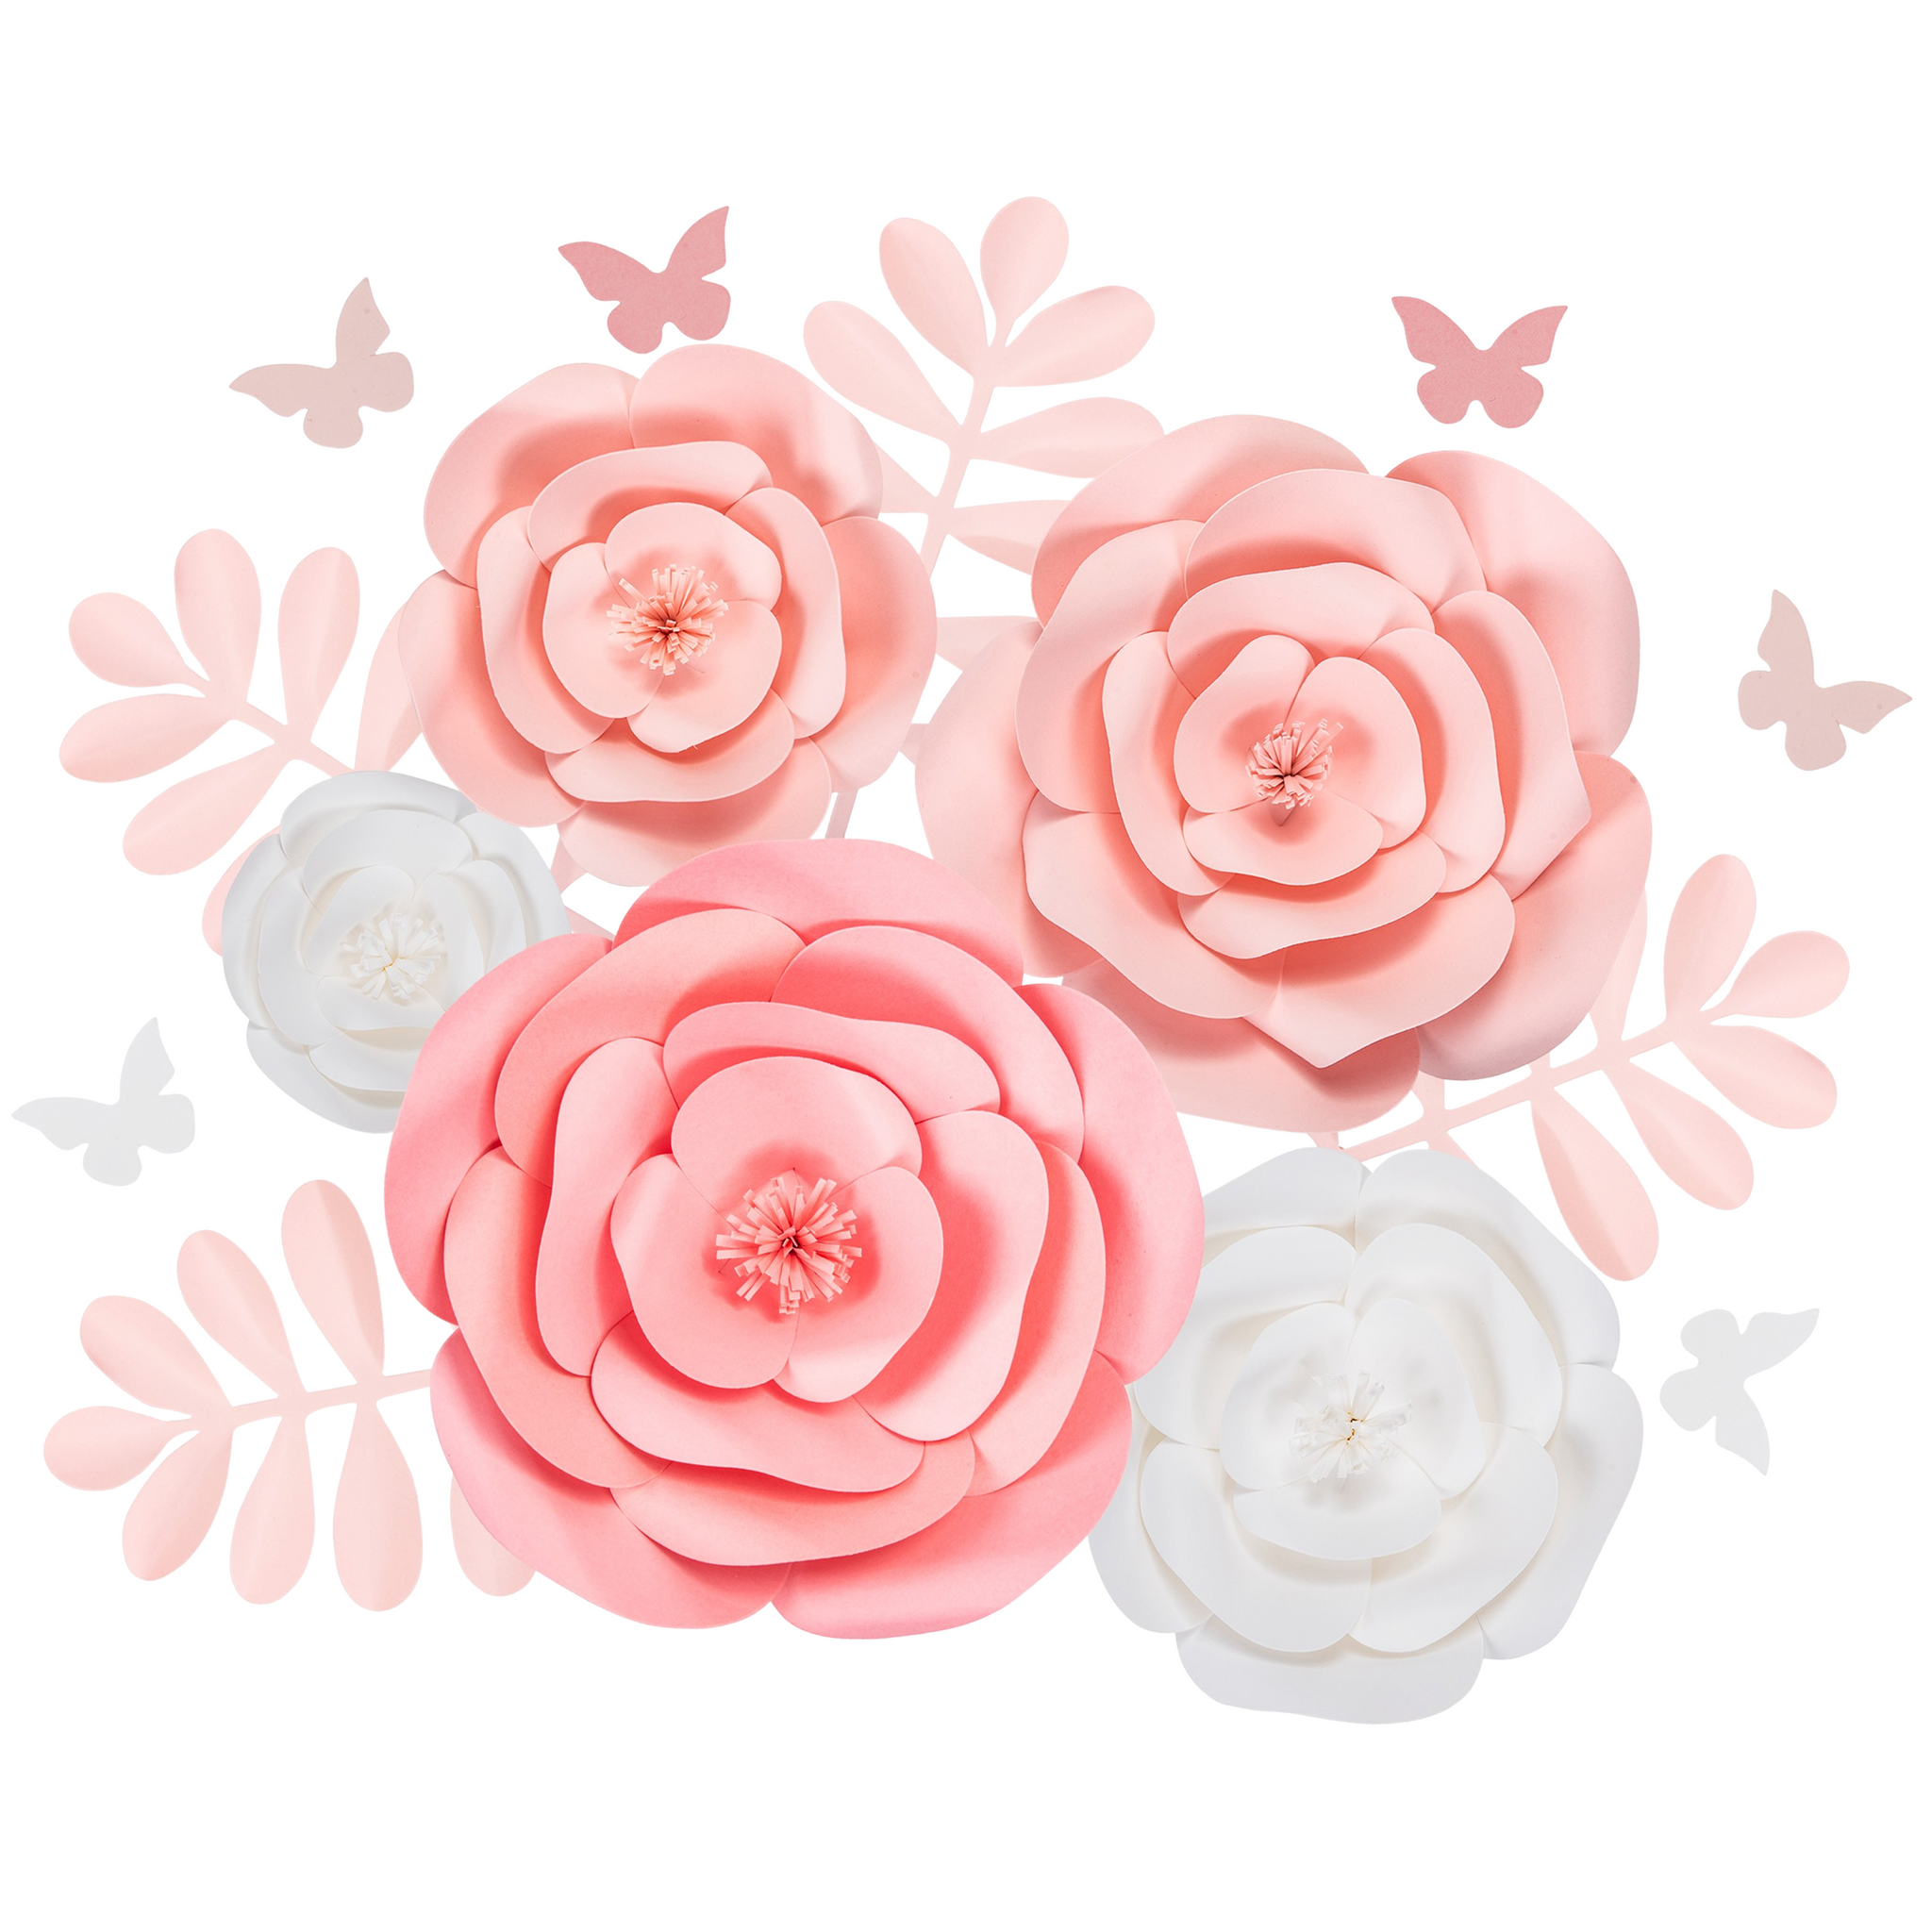 Rainbows & Lilies Large 3D Paper Flowers Decorations, 15-Pieces, Handmade & Assembled (Pink, White)